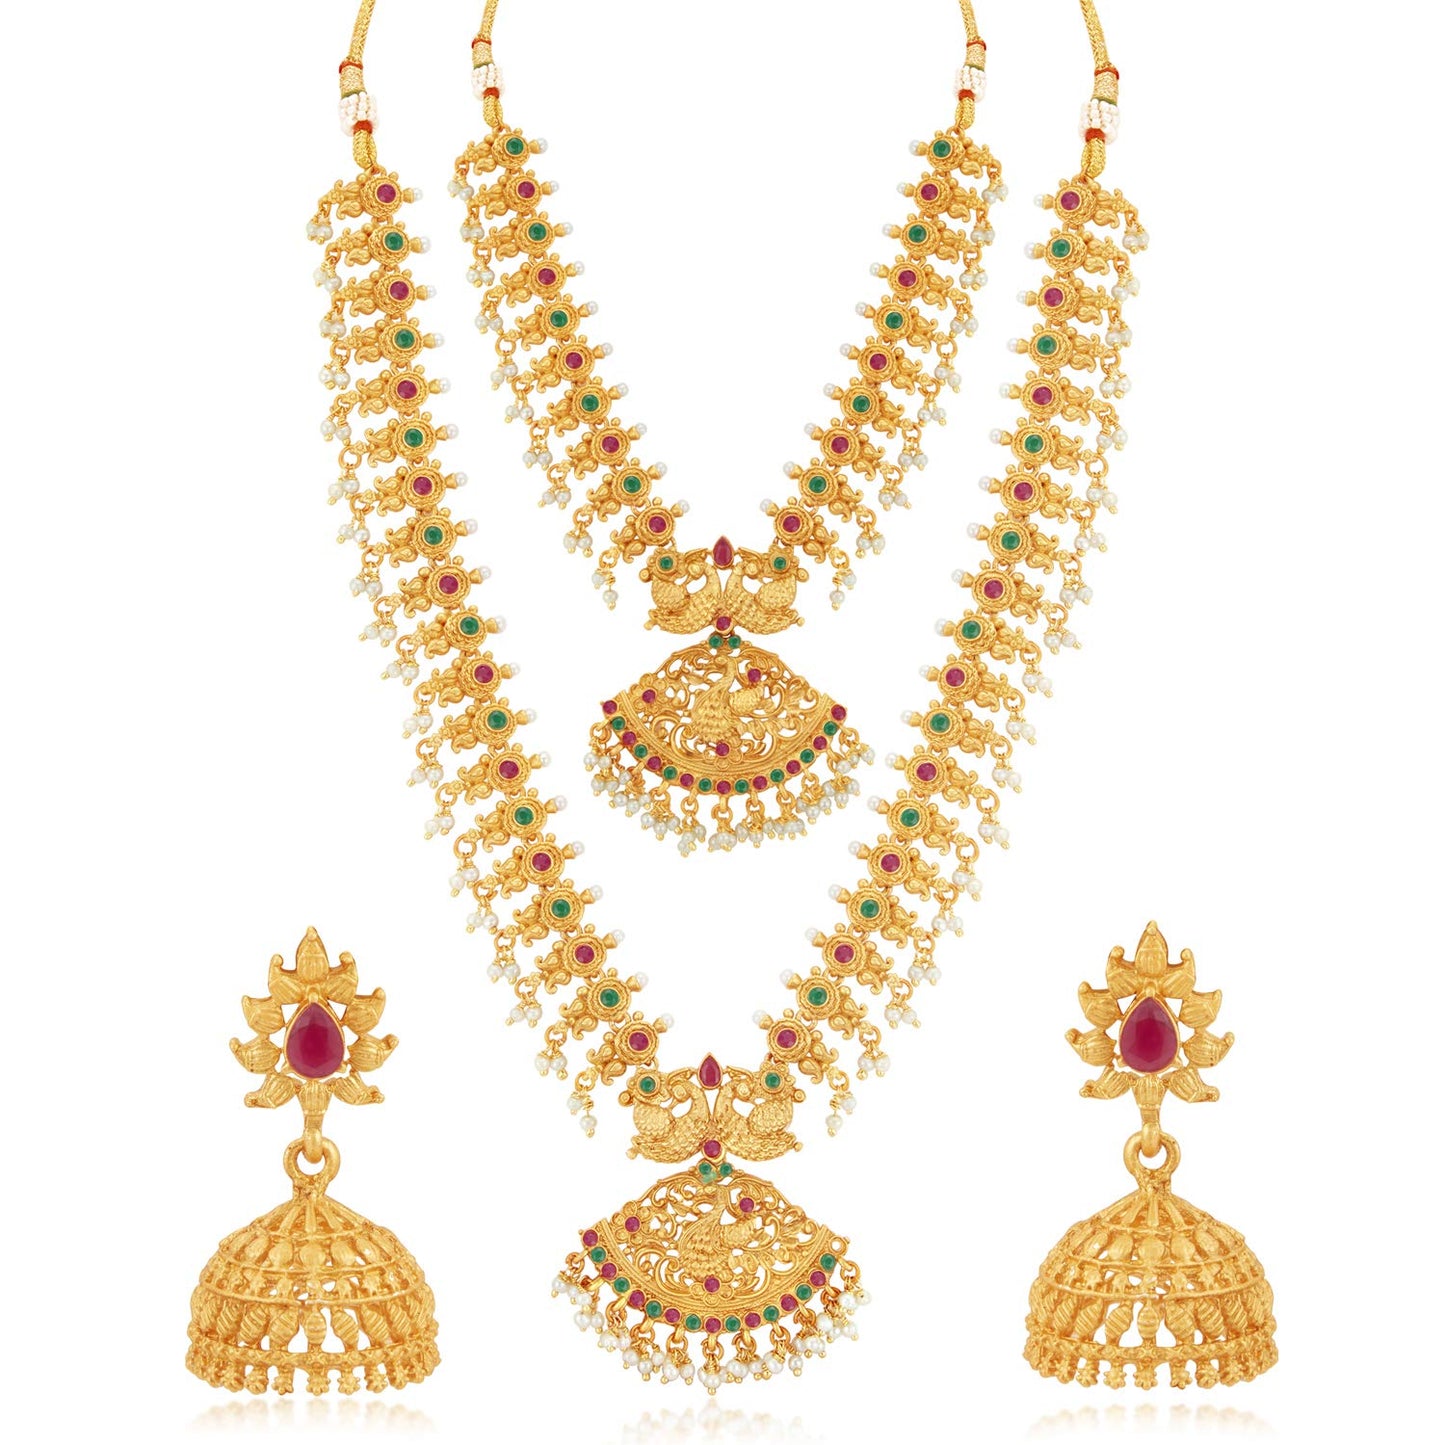 Sukkhi Classic Pearl Gold Plated Long Haram Necklace Set for Women (SKR70419), Pink & Green, Free Size